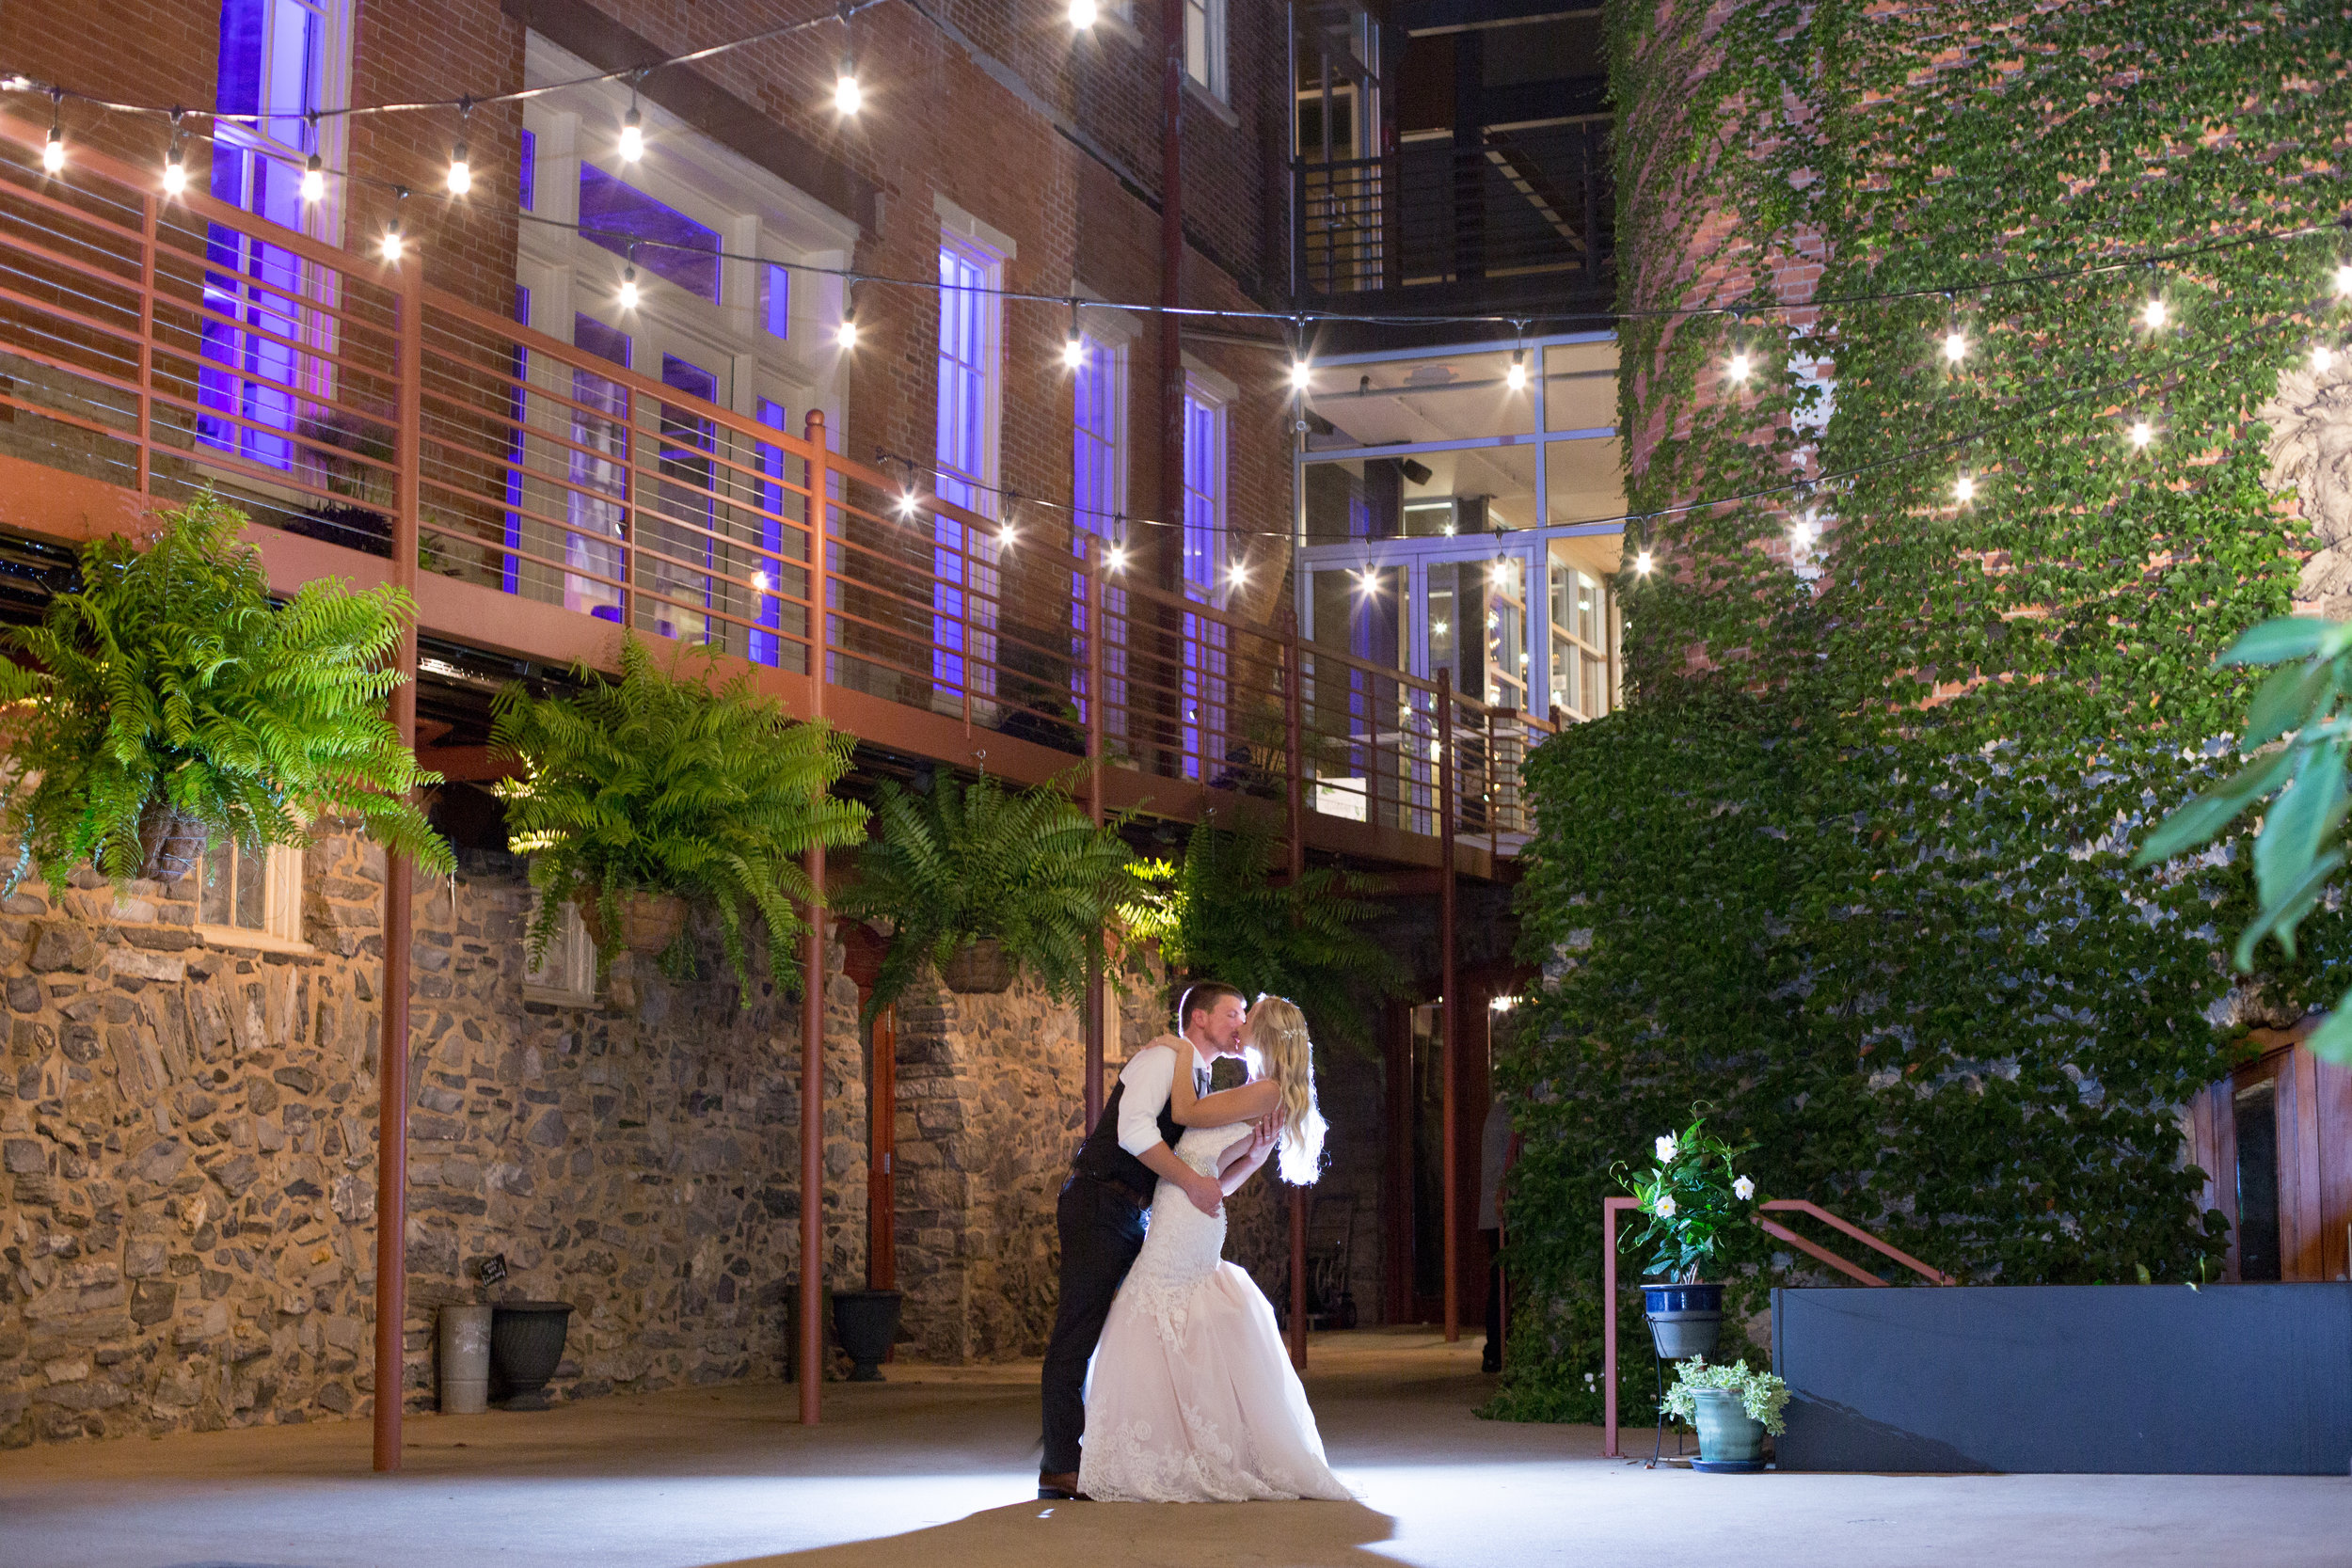 Couple dancing in garden courtyard outdoor space lit up at night